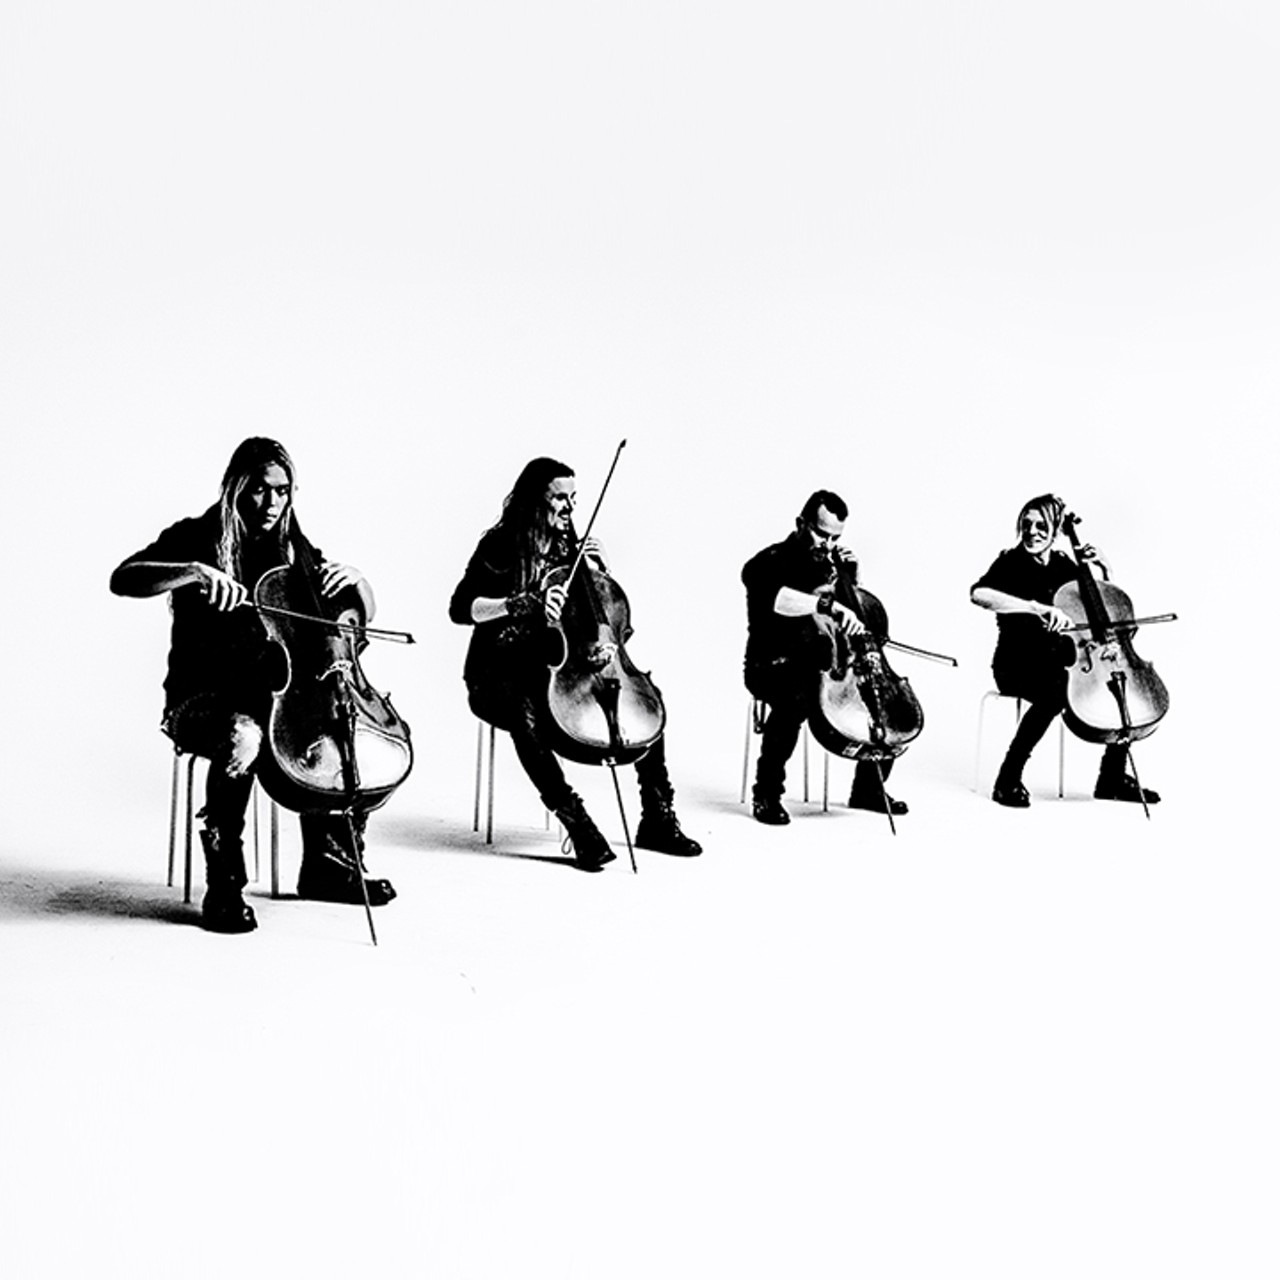 Wednesday, Sept. 6Apocalyptica Plays Metallica at House of Blues